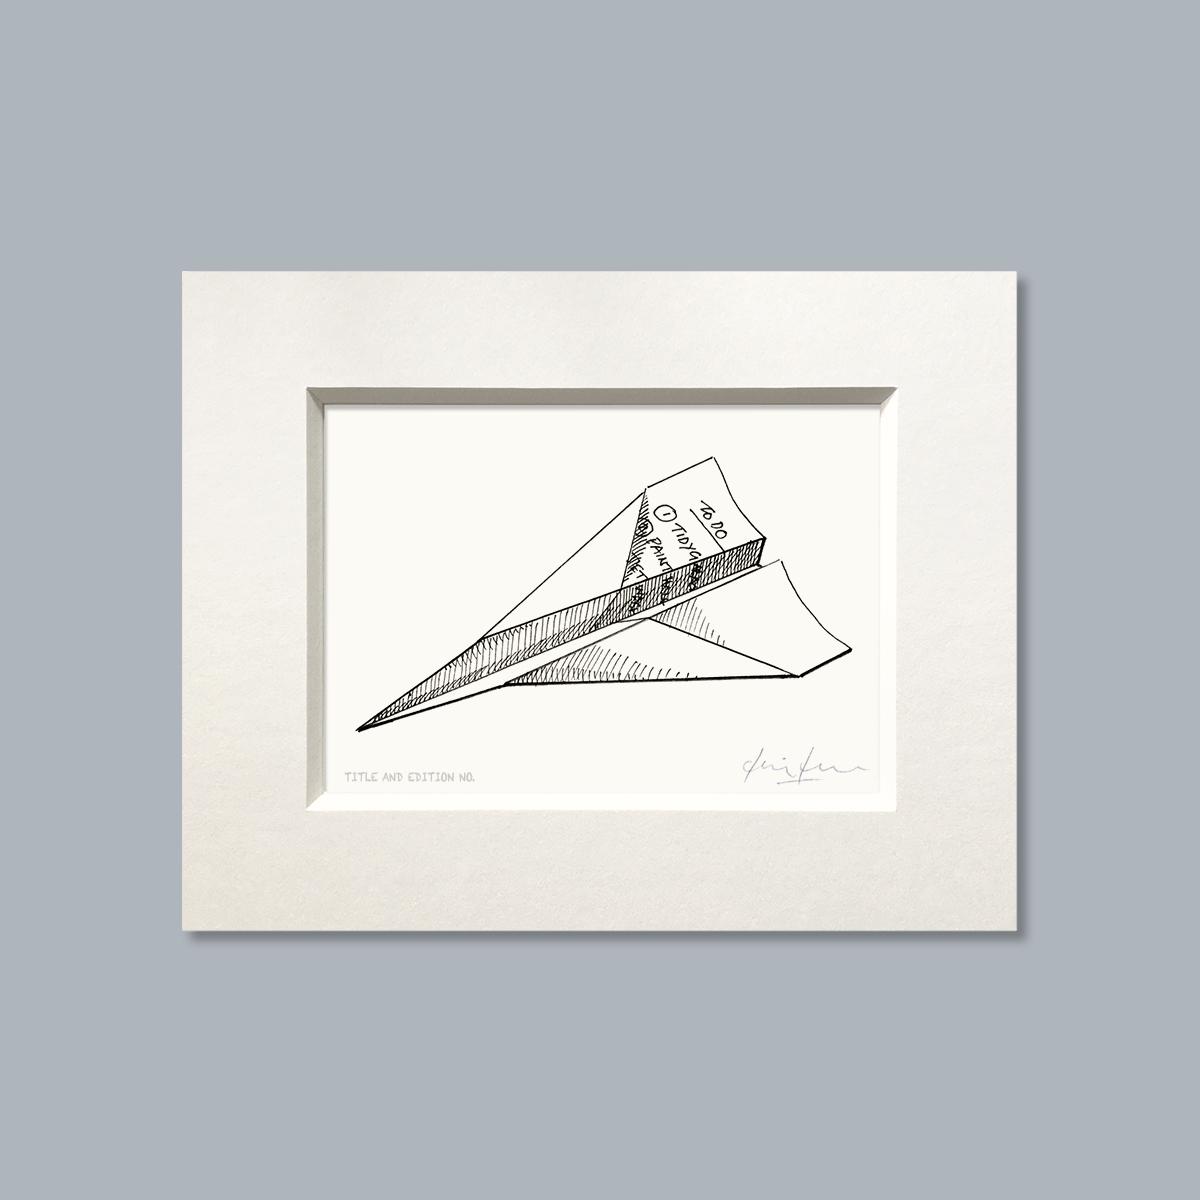 Limited edition print from a pen and ink drawing of a to-do list folded into a paper aeroplane in a white mount